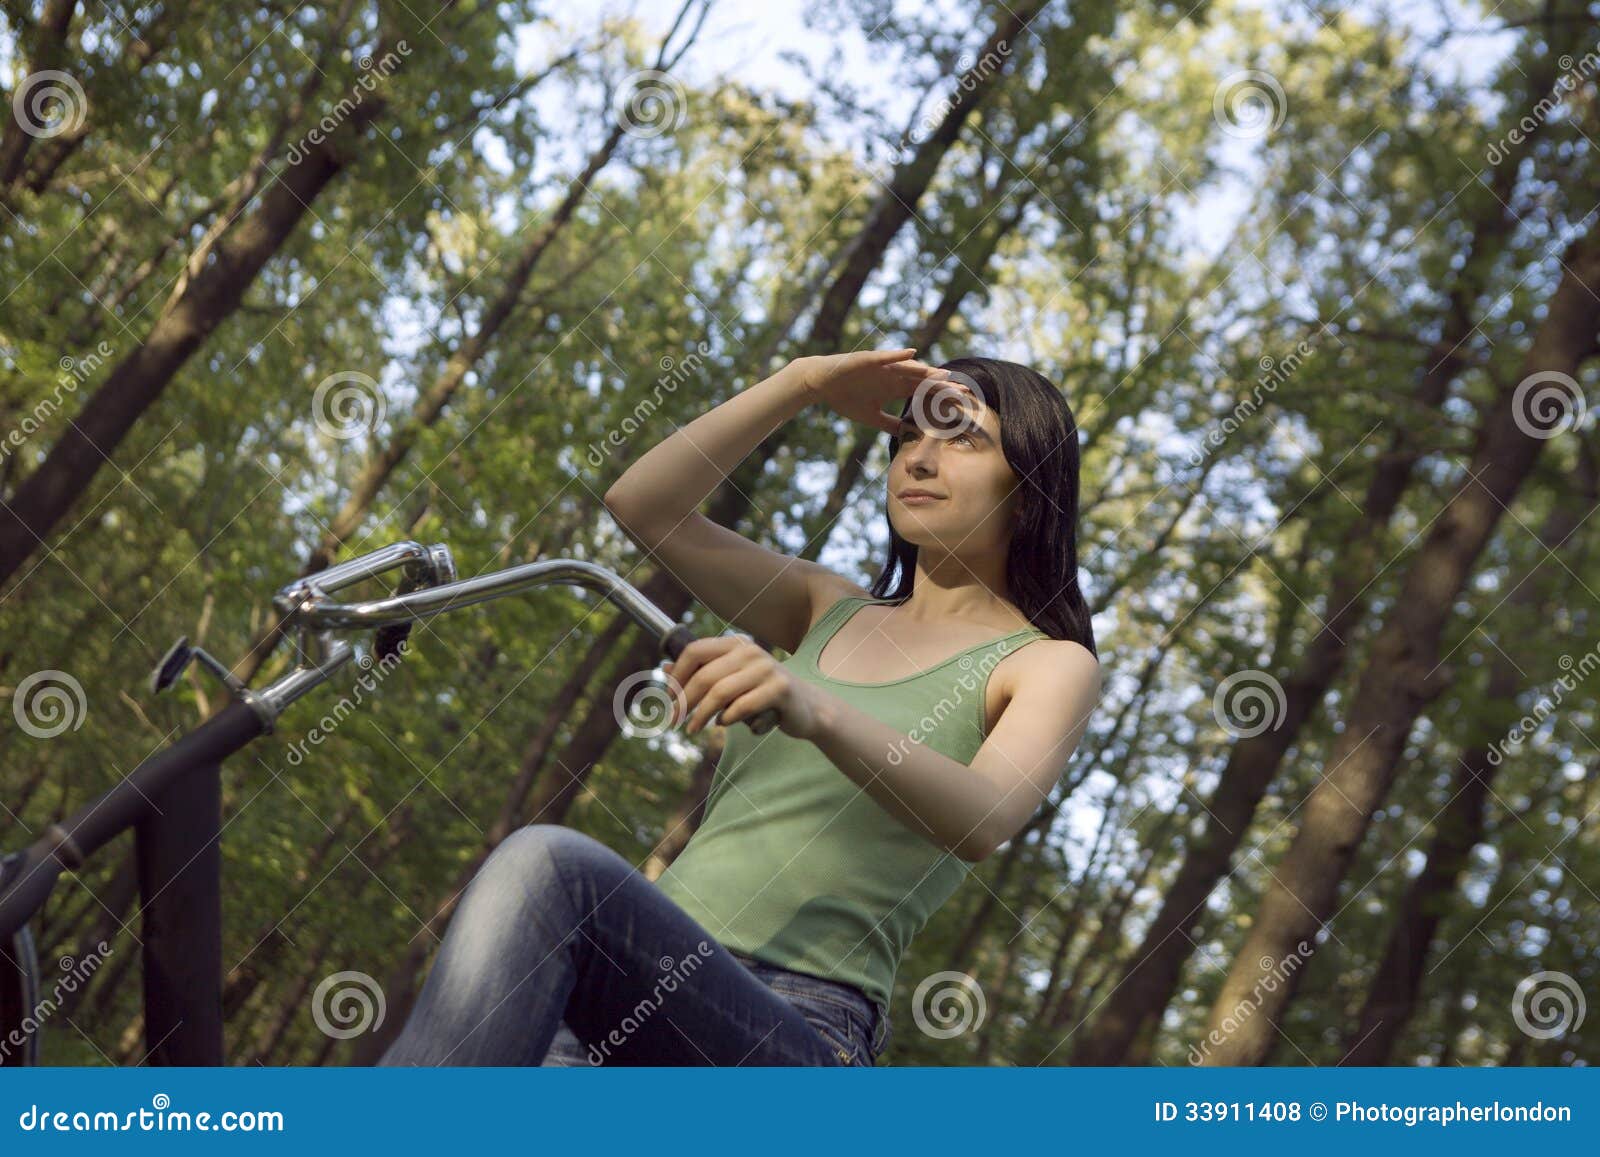 woman shielding eyes while riding bicycle in woodland